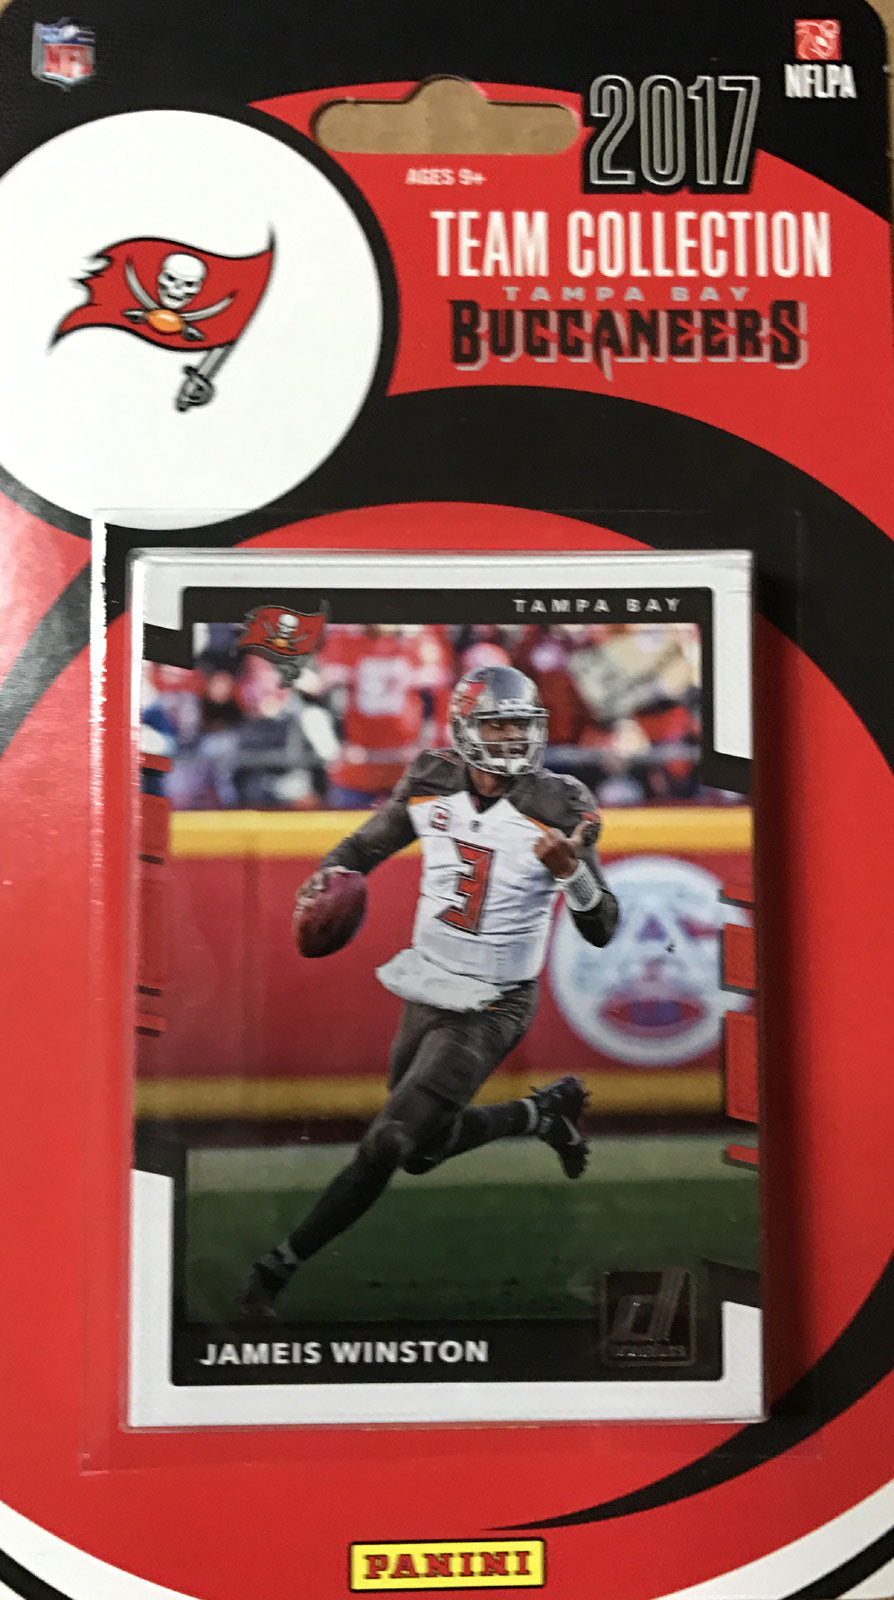 Tampa Bay Buccaneers 2017 Donruss Factory Sealed Team Set with Rated Rookie  cards of Chris Godwin and O.J. Howard.